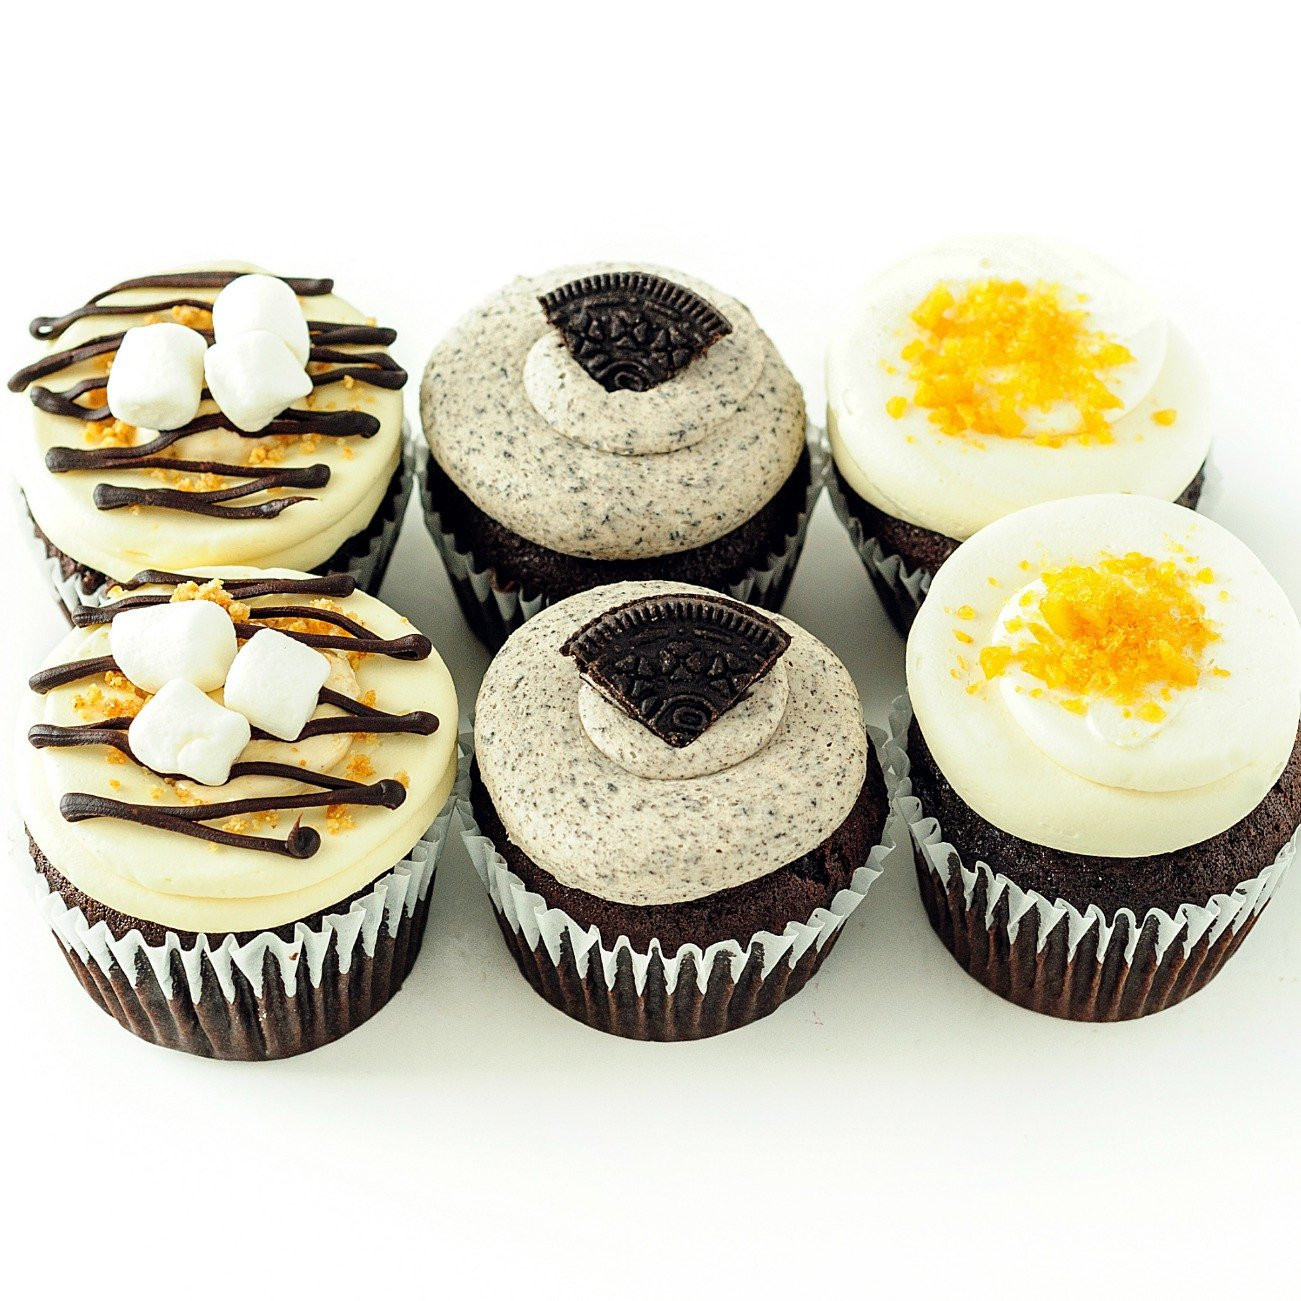 Gourmet Cupcakes Delivered
 Gourmet Cupcakes Cupcake Delivery